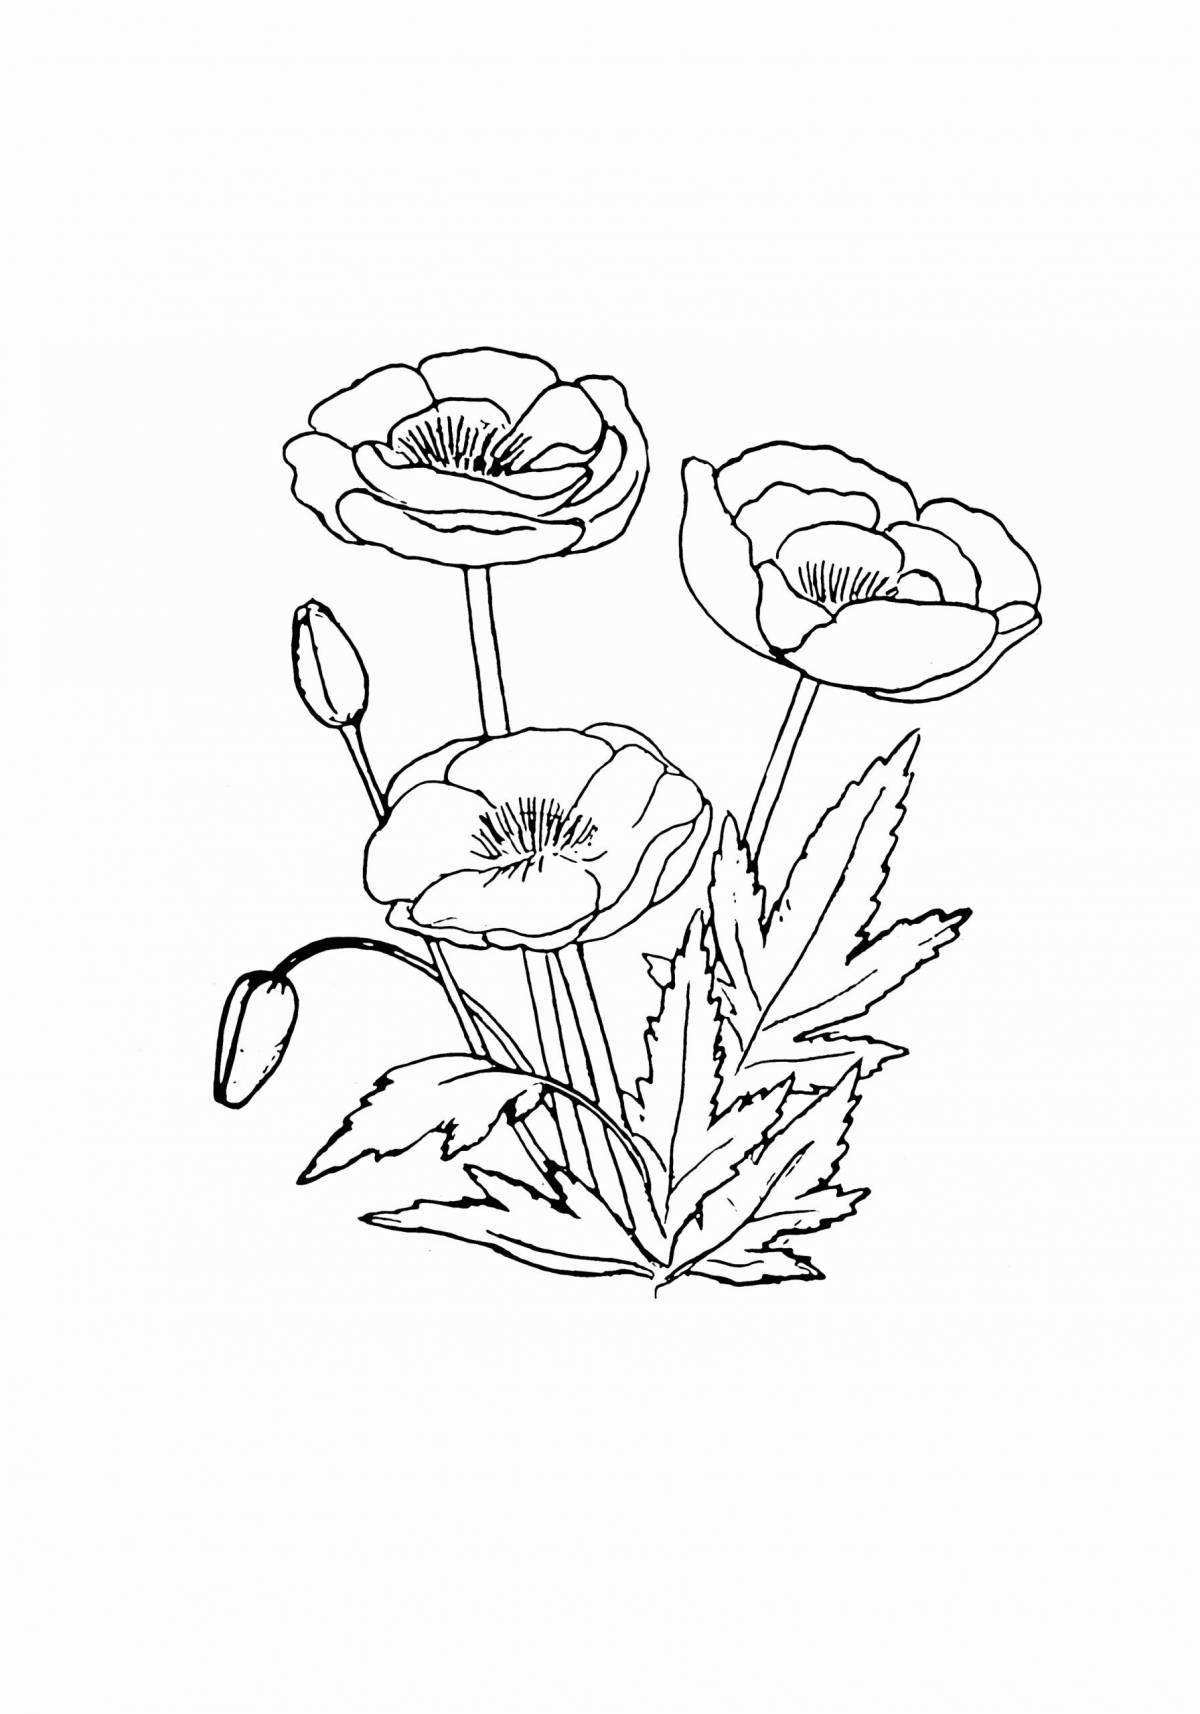 Coloring page playful poppy flower